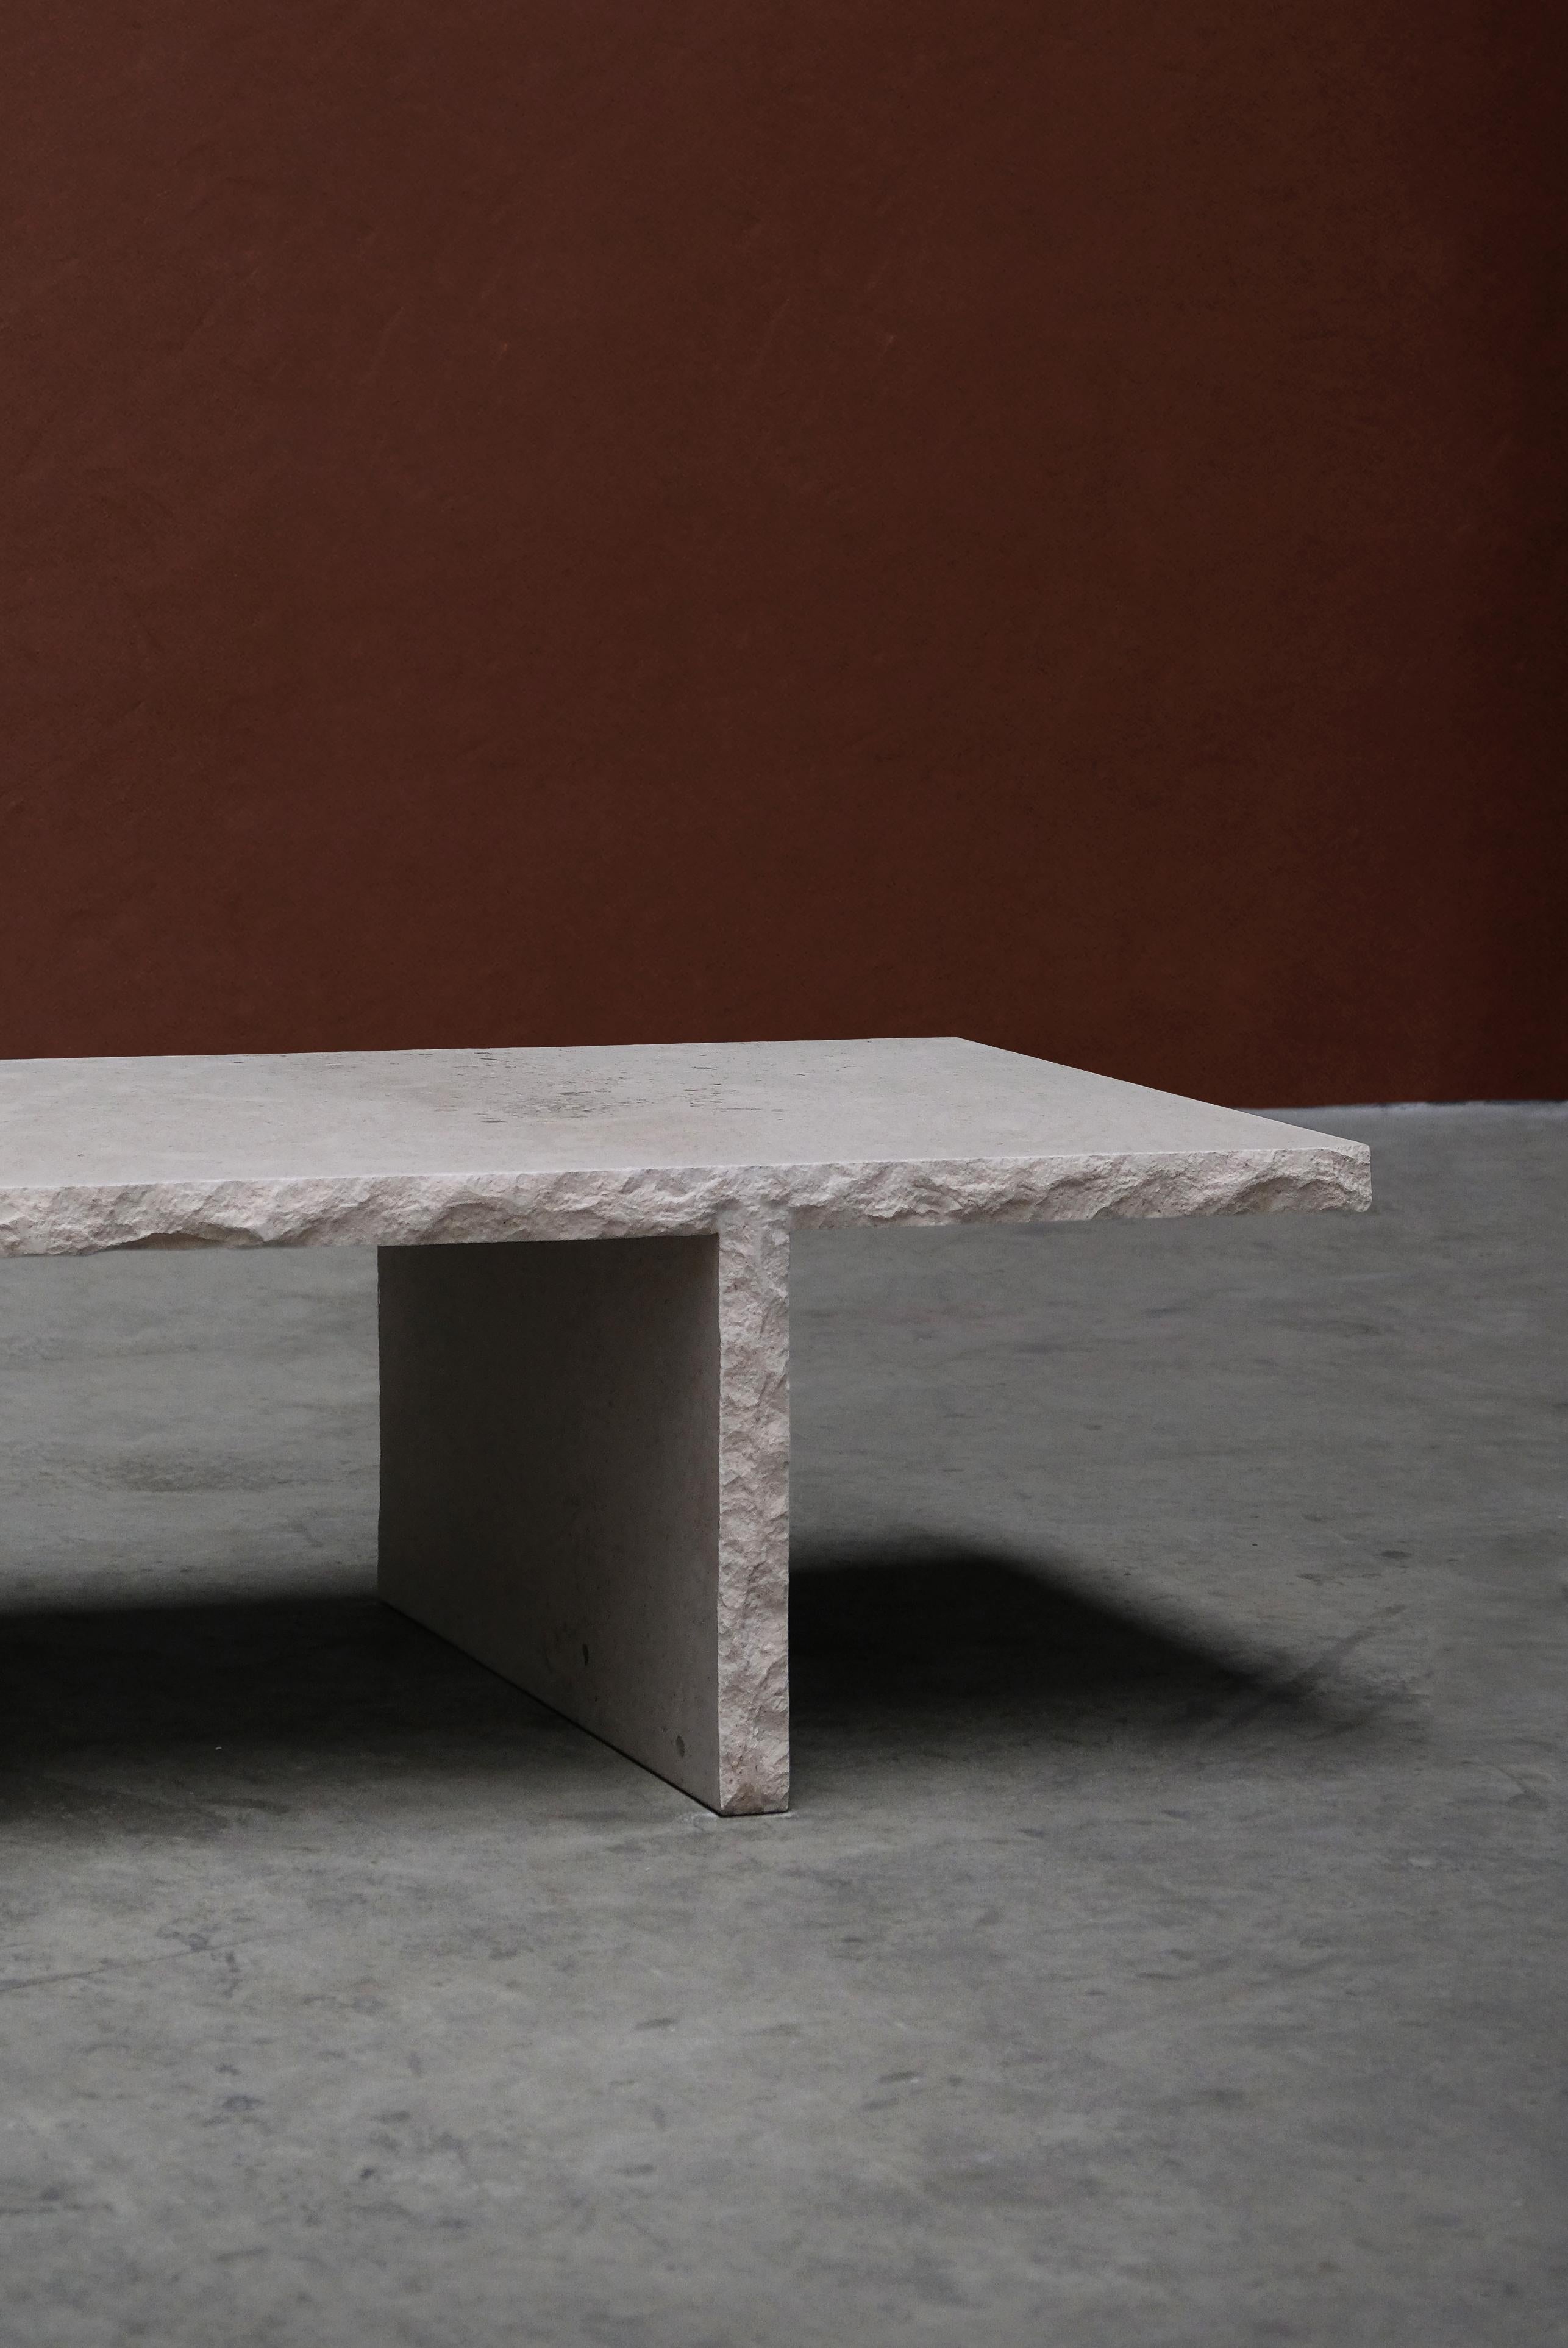 Sculpted Bourgogne Stone Coffee Table, Fruste by Frederic Saulou 1